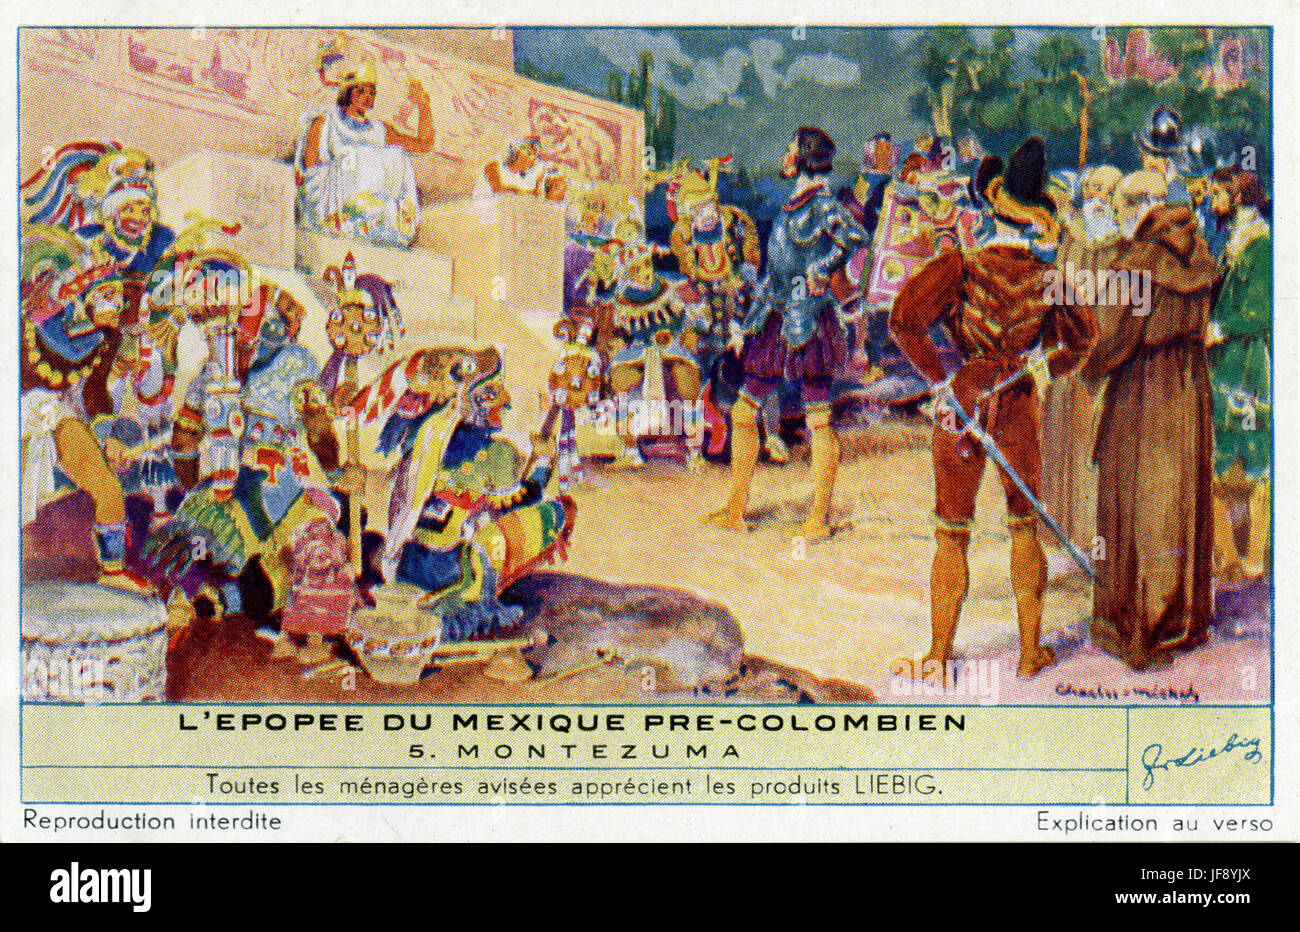 Montezuma II (c. 1466 – 29 June 1520), ruler of Tenochtitlan, killed during Spanish conquest of Mexico. Pre-Colombian Mexican culture. Liebig collectors card, 1950 Stock Photo